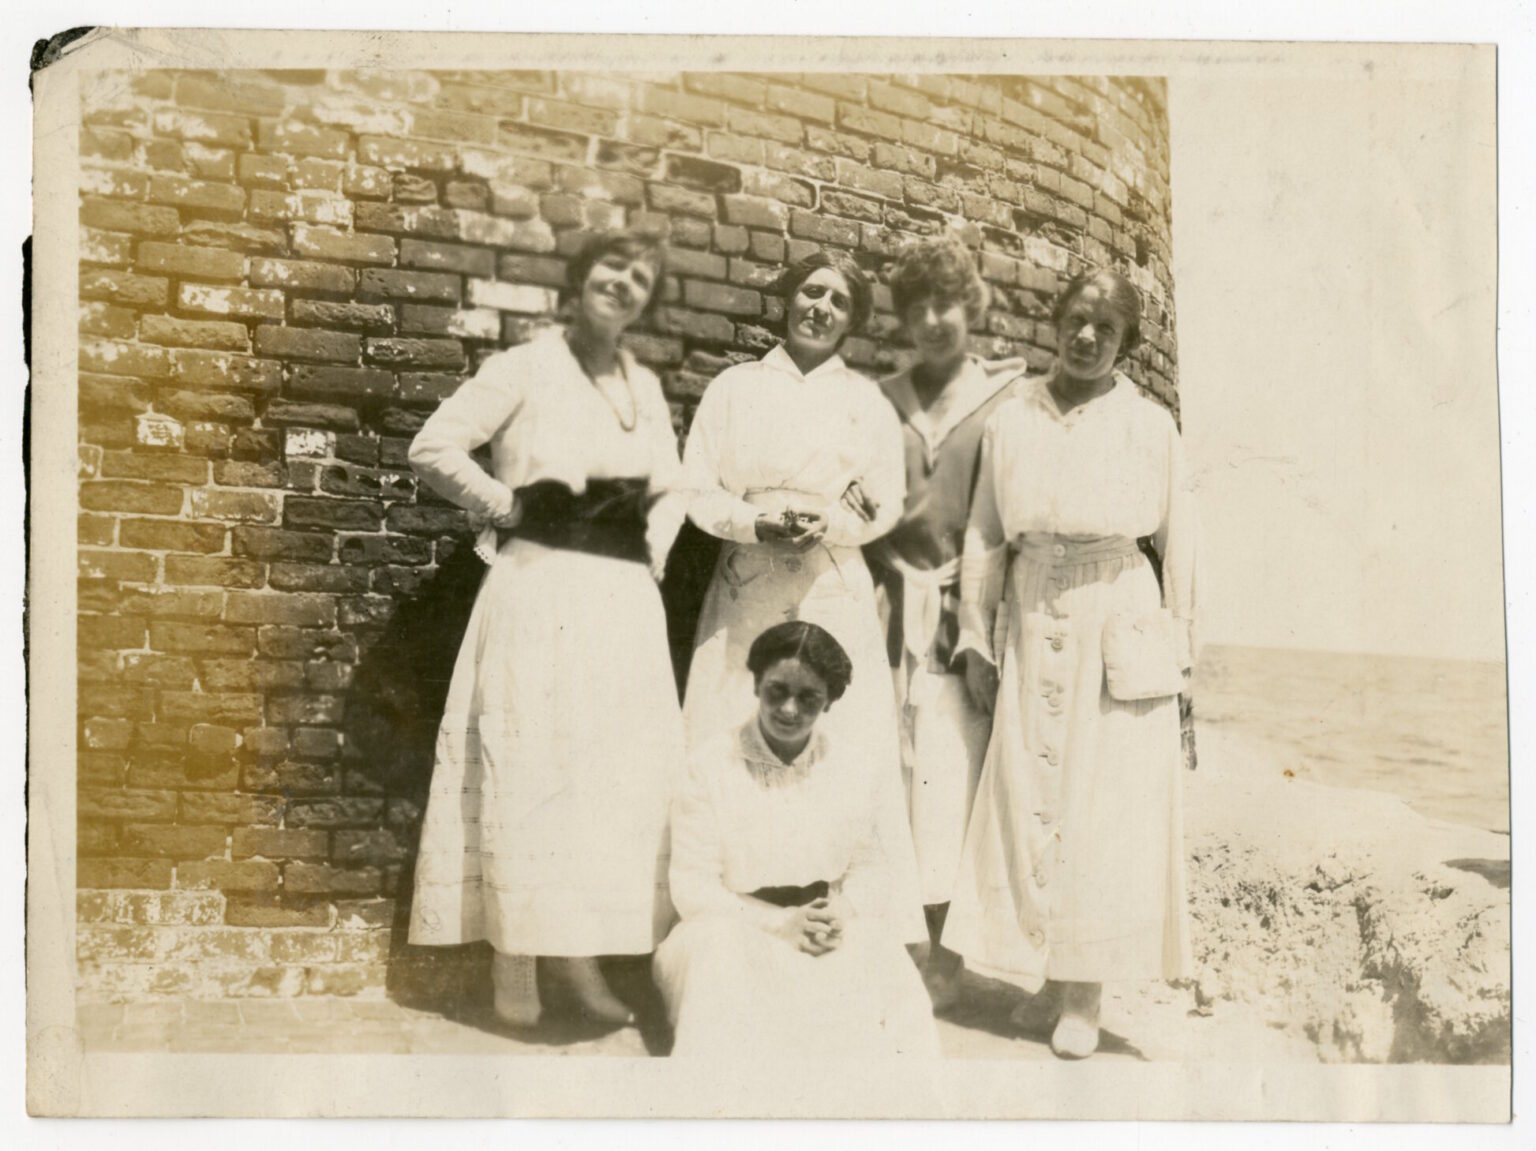 Four women posing in front of a brick wall.